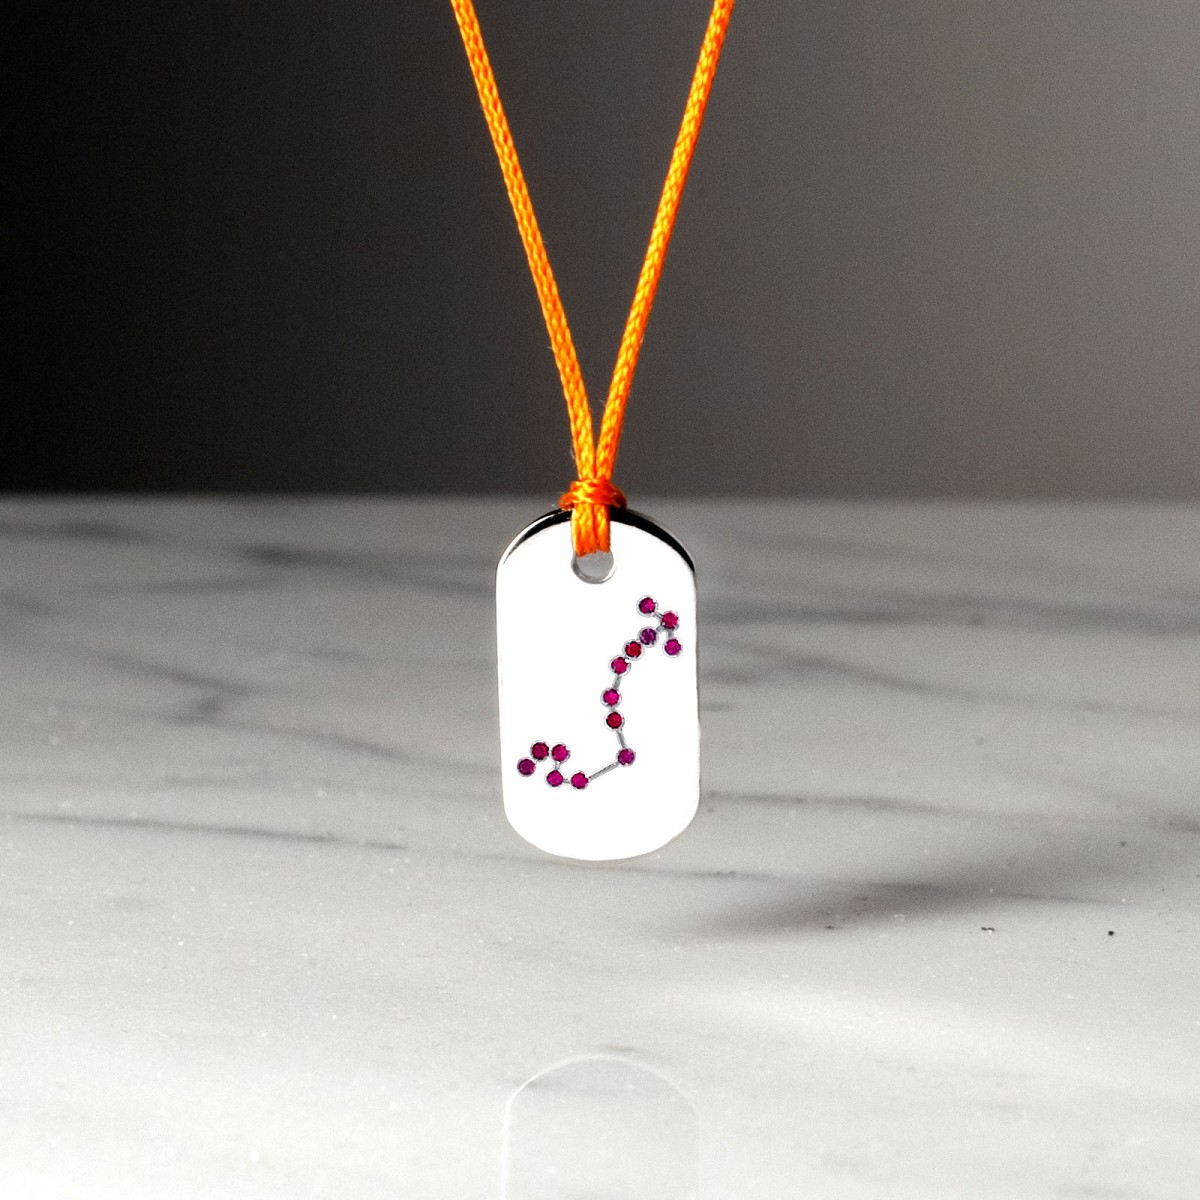 VOUS ETES BALANCE - Necklace handcrafted by the Hervé Domar workshop